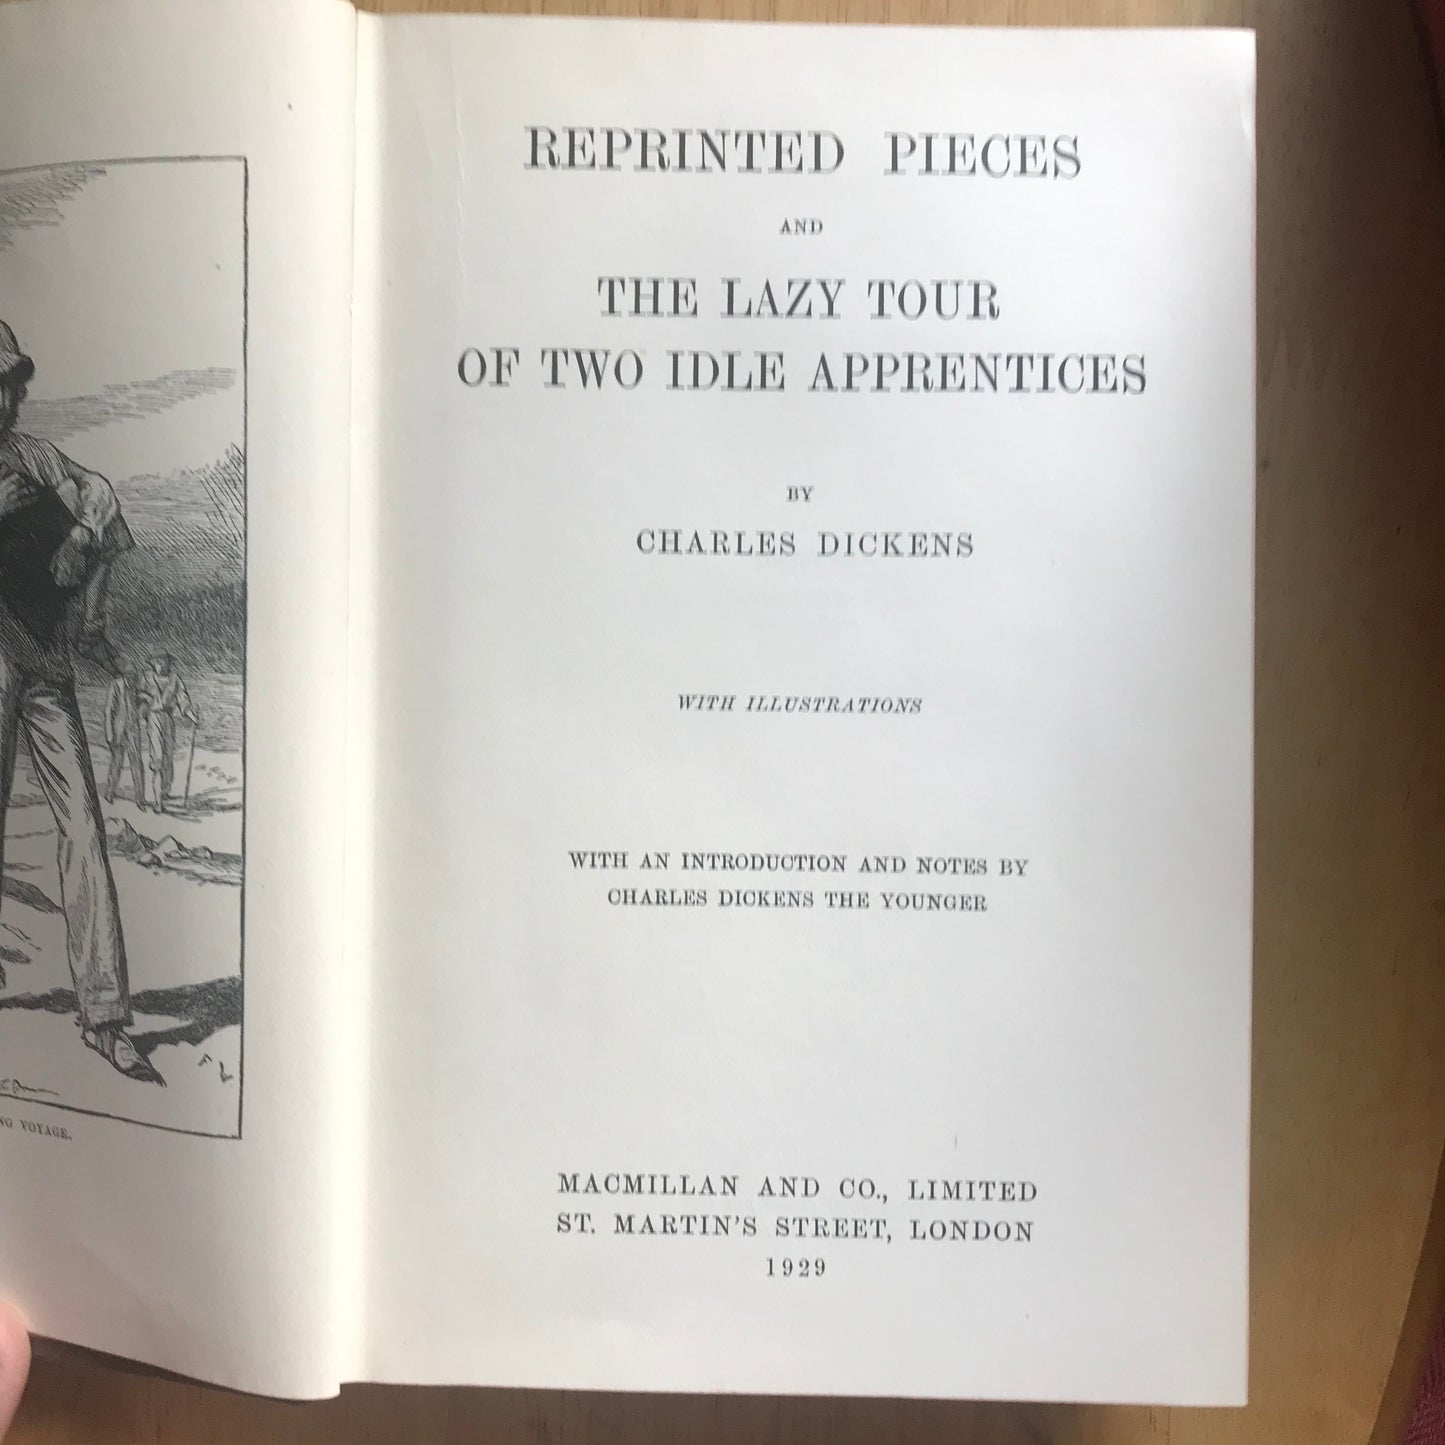 1929 Reprinted Pieces Etc von Charles Dickens (MacMillan Publisher)